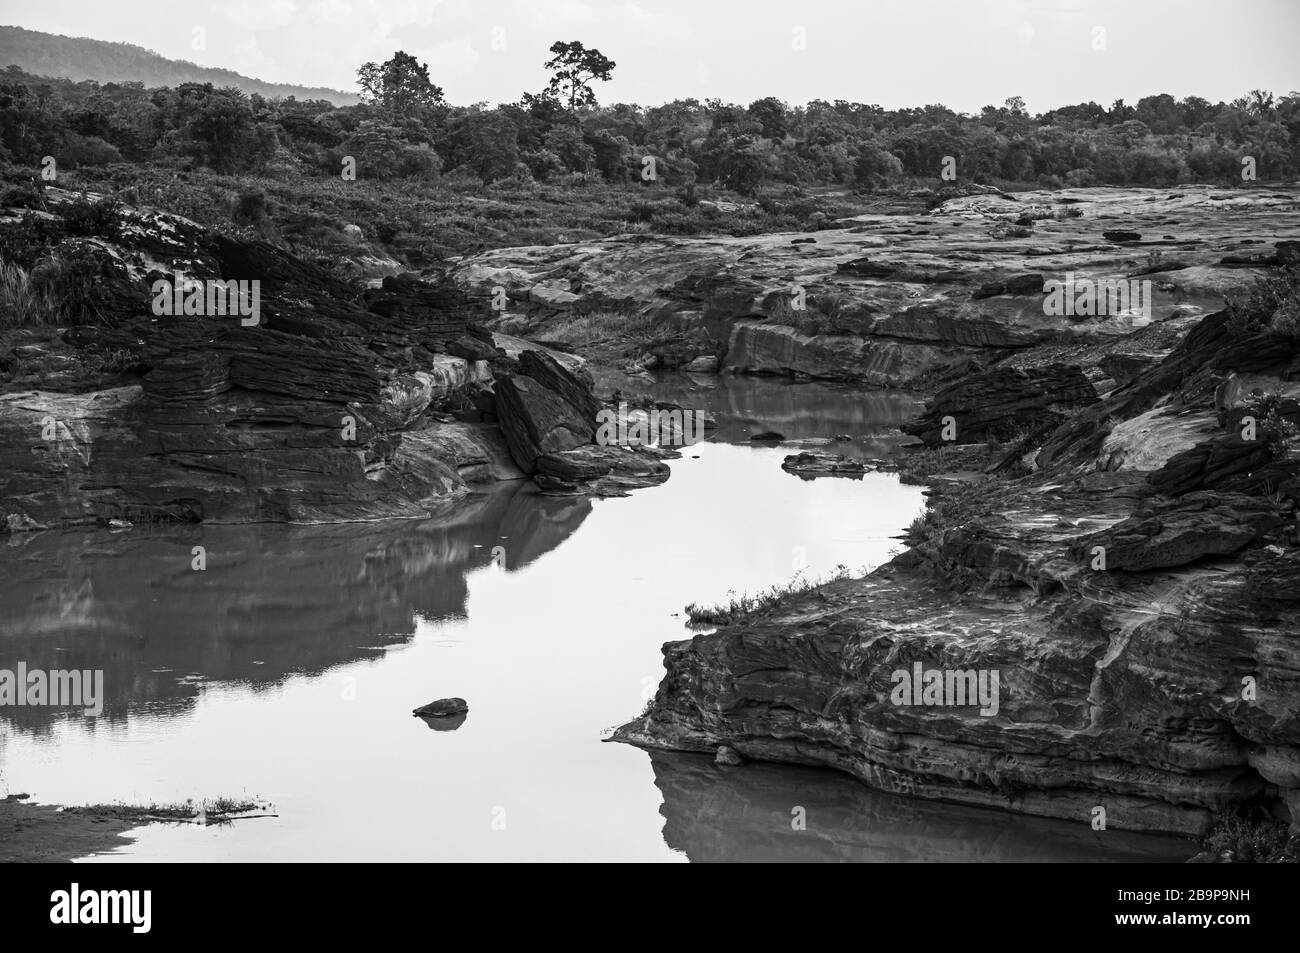 Large Sand stone canyon cliff shoreline of Mekong river under evening lighton cloudy day at Ban Pha Chan, Ubon Ratchathani, Thailand. Black and white Stock Photo